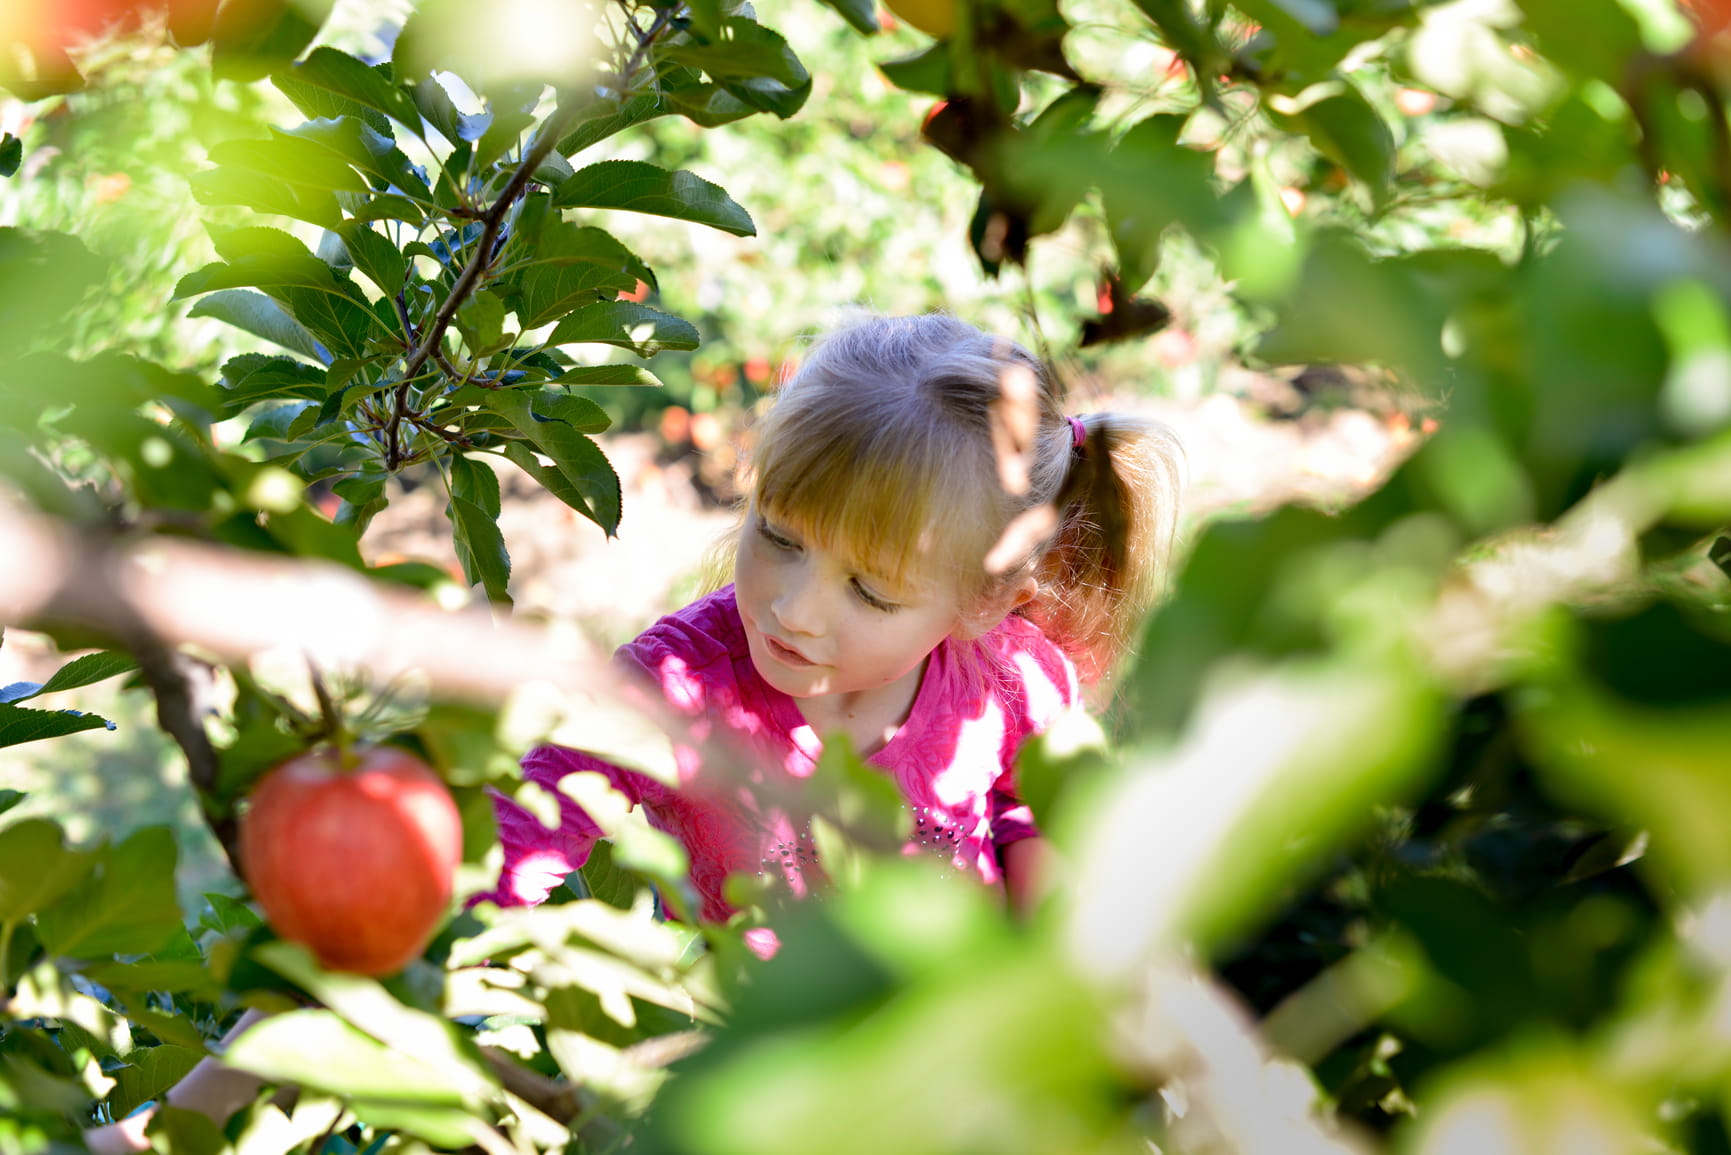 Young girl picking apple from tree